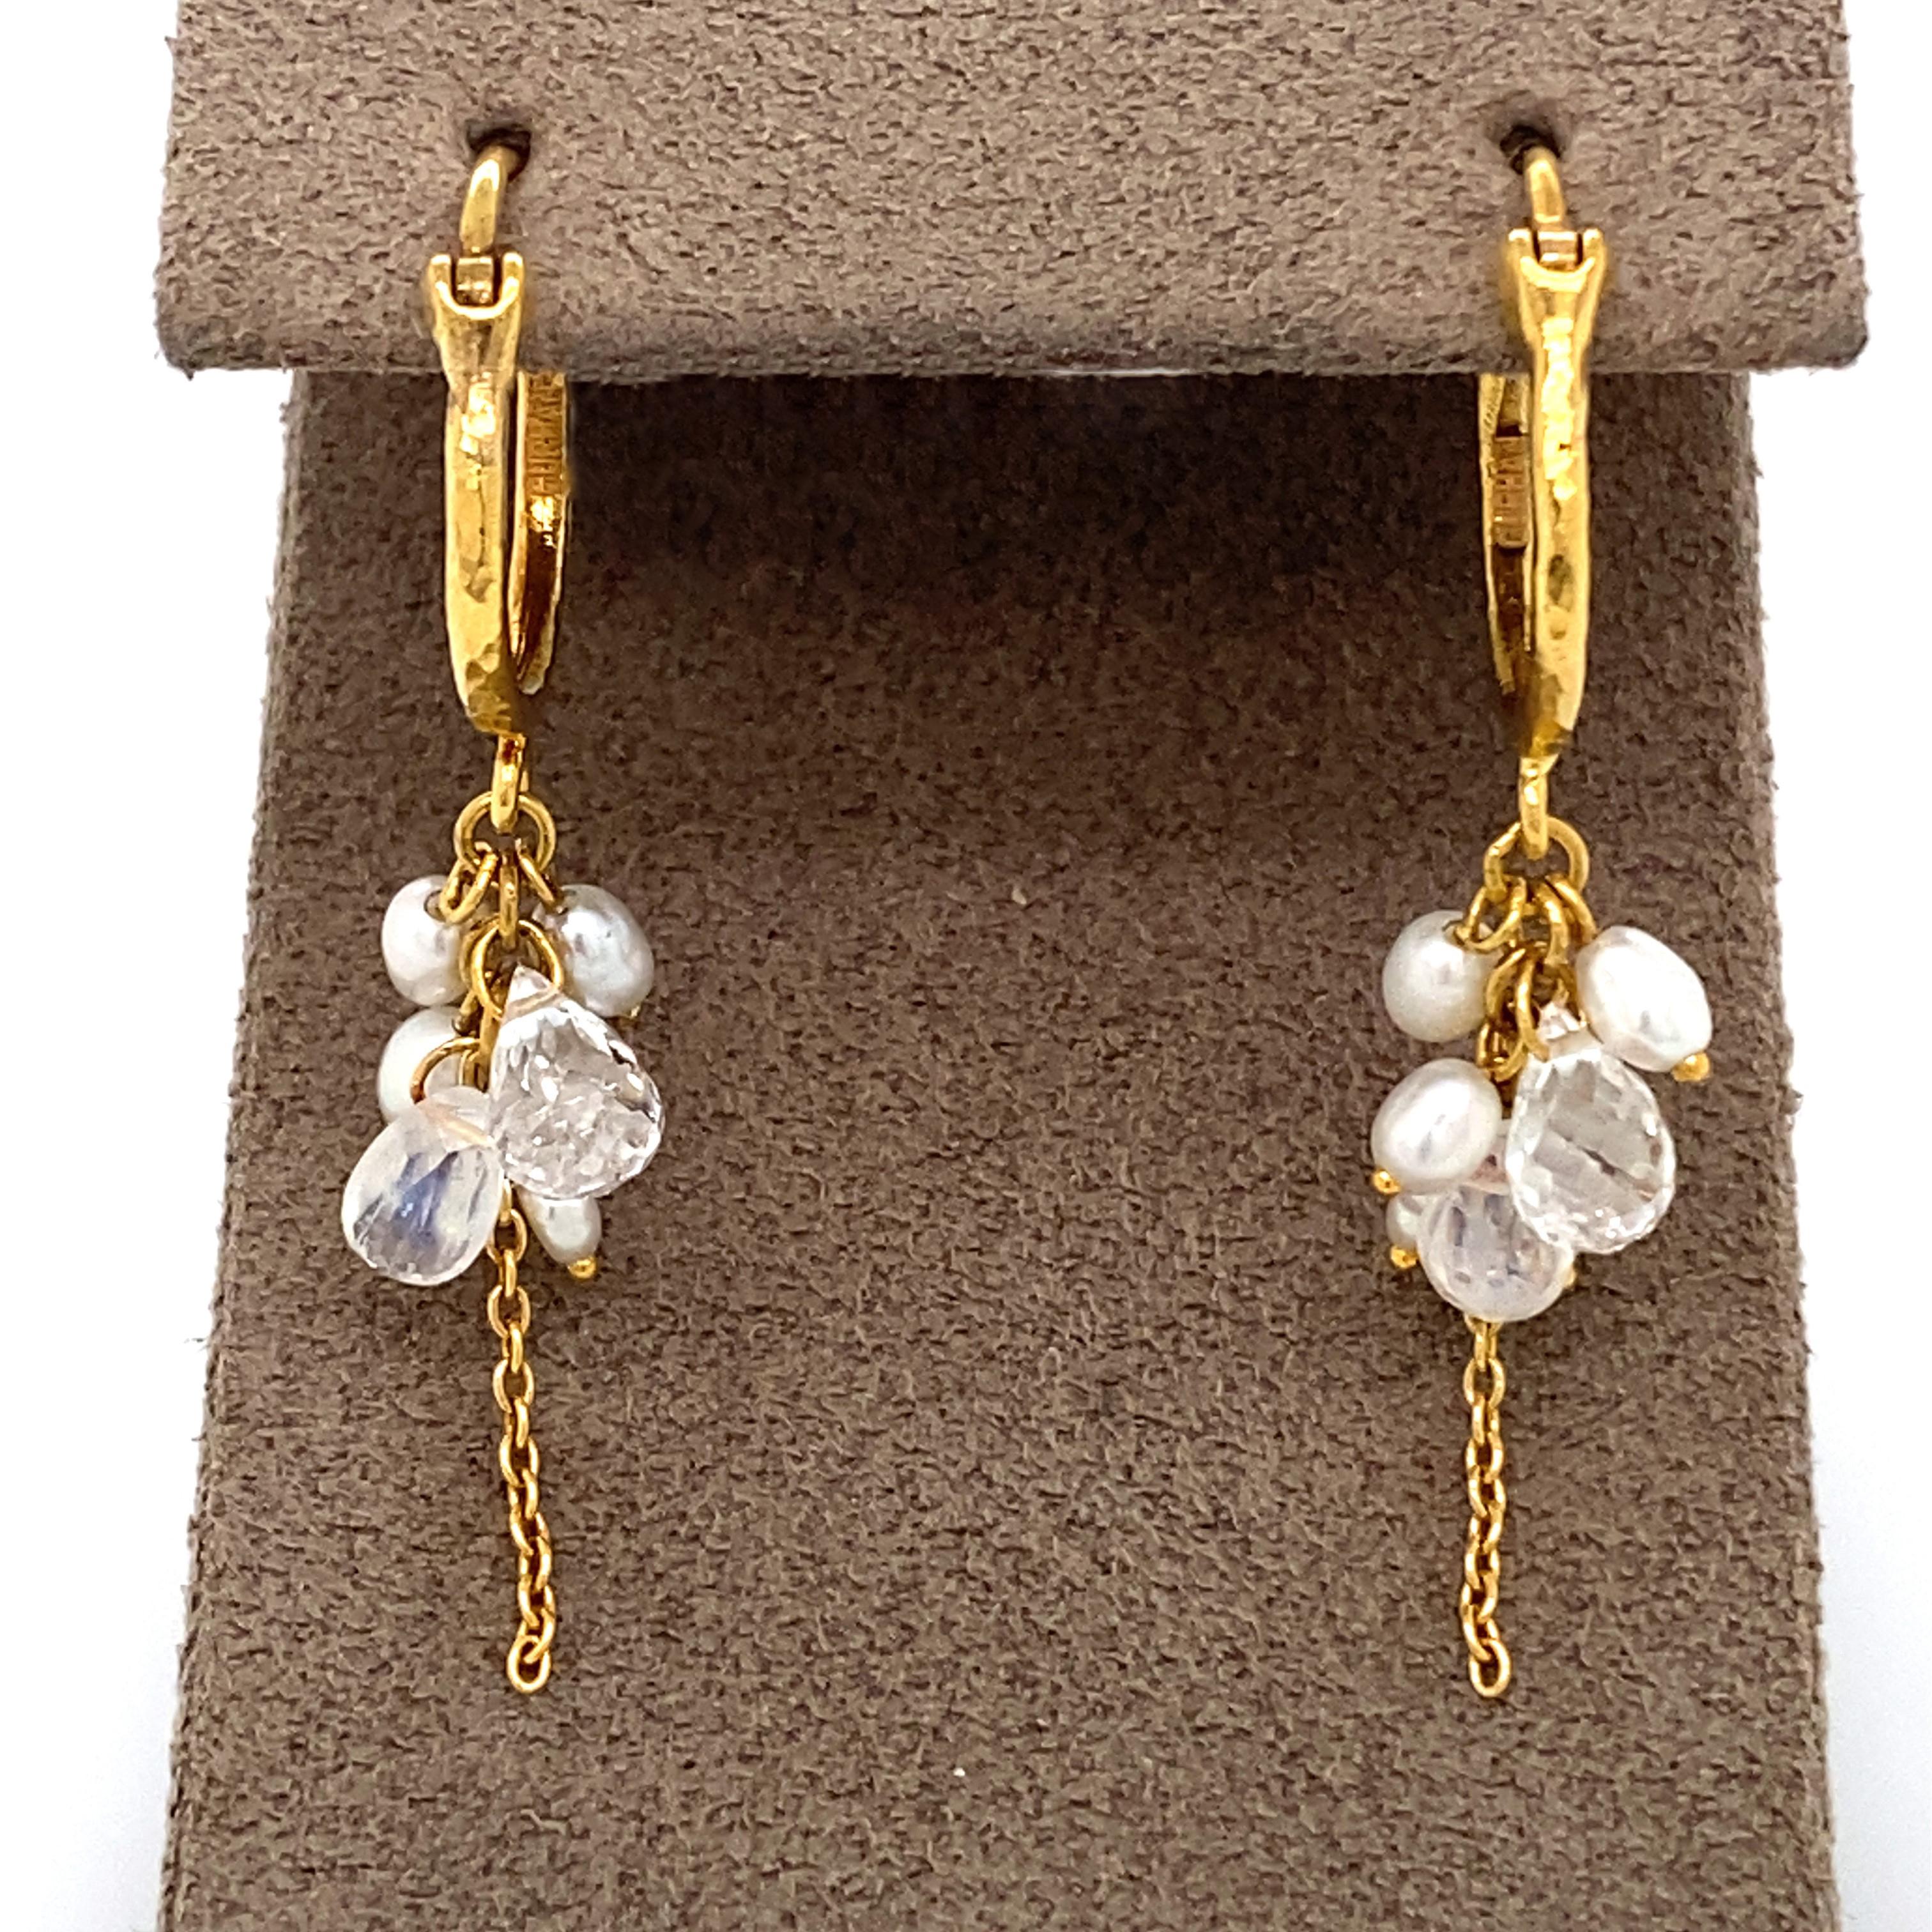 24kt yellow gold dew pearl drop earrings, cluster of keshi pearls, moonstone, and white topaz briolettes, 1.56ct total weight. Huggie hoop top.